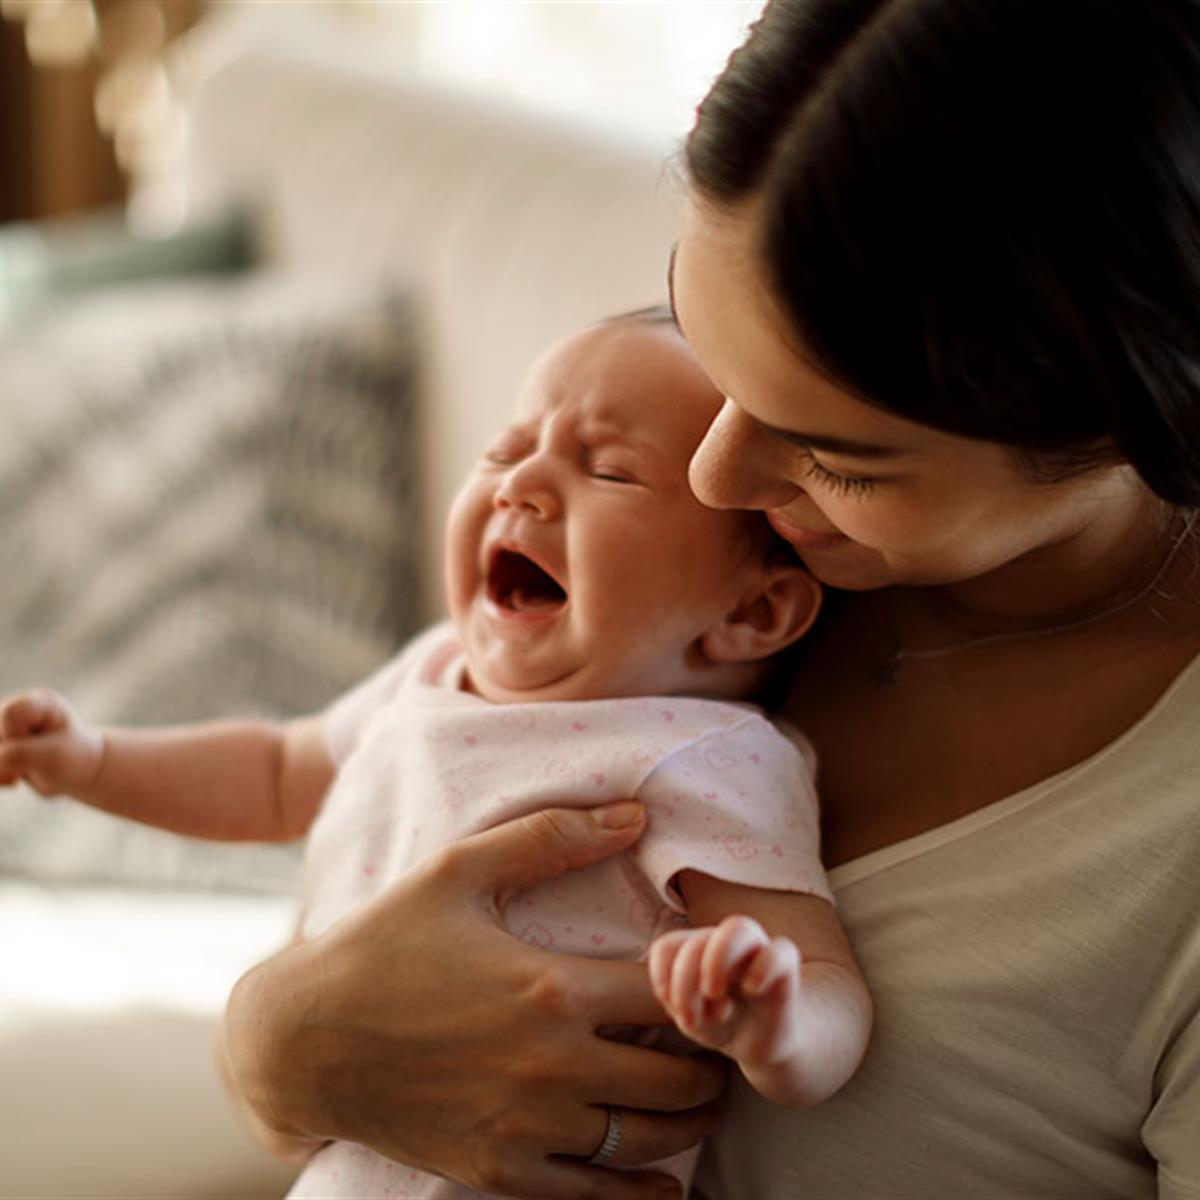 Sleeping Romantic Xxx Videos - Abdominal Pain in Infants: 8 Possible Reasons Your Baby's Tummy Hurts -  HealthyChildren.org